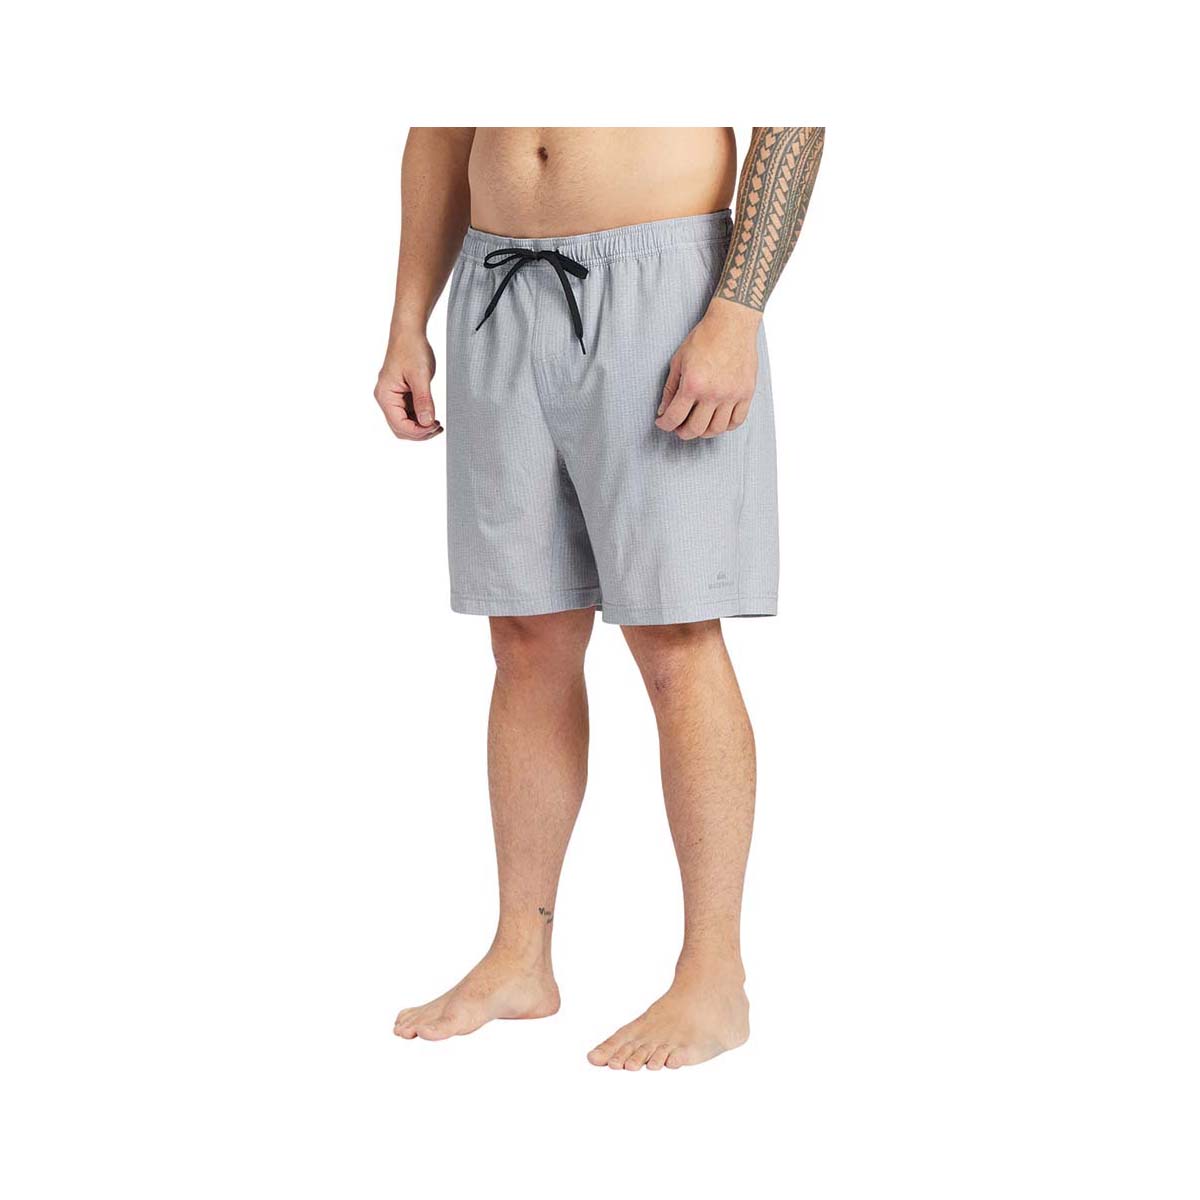 Quiksilver Men's After Surf Volley Boardshorts Light Grey Heather L